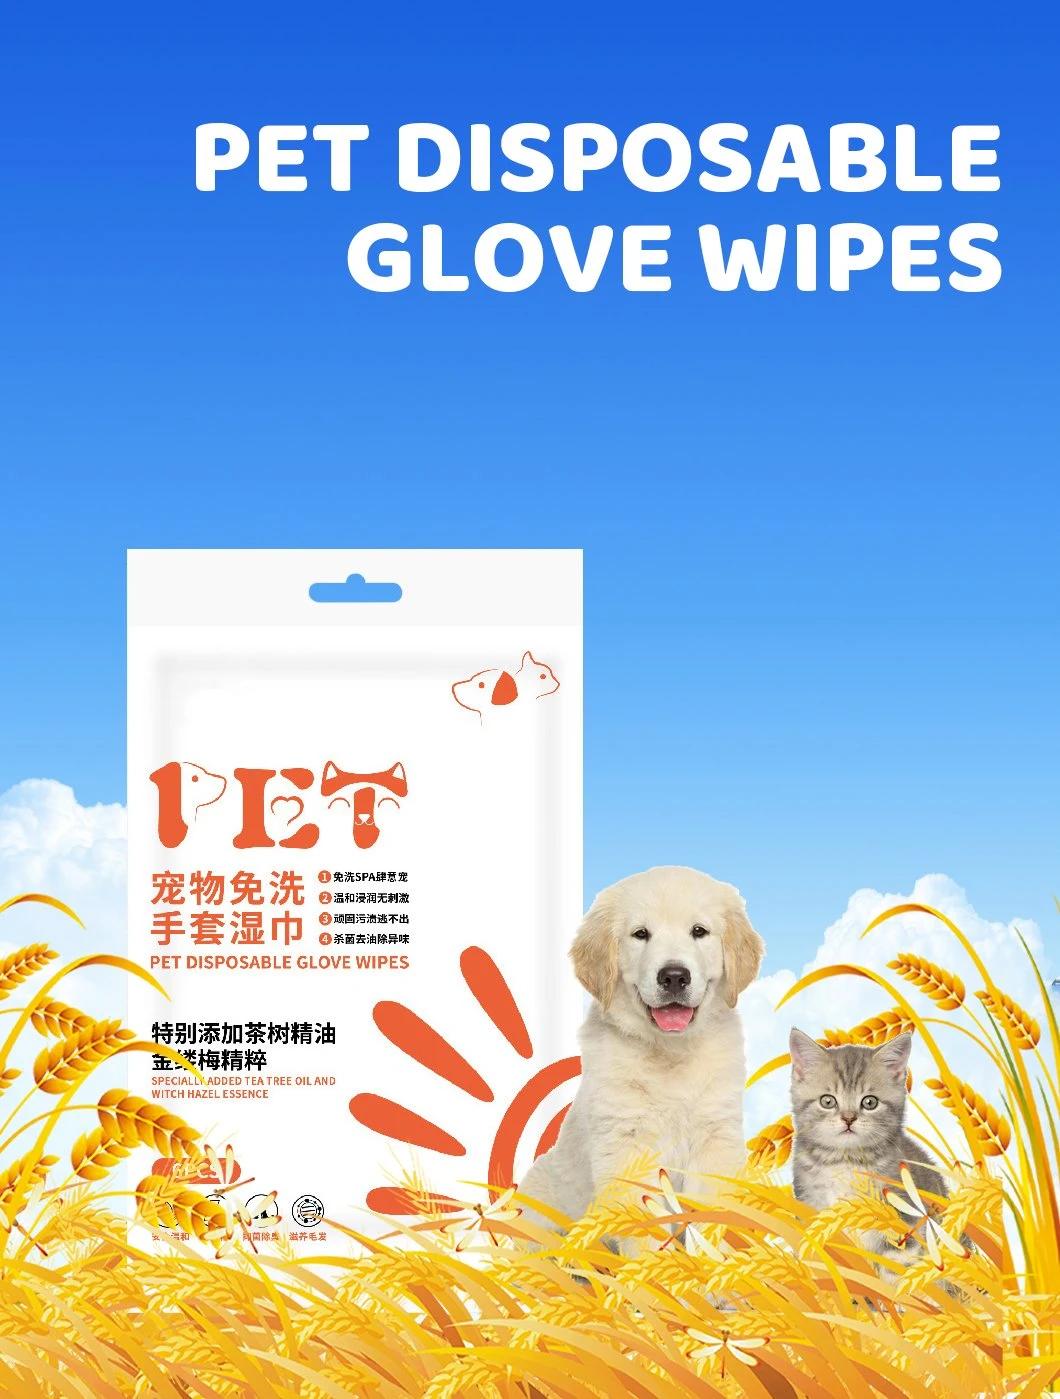 Finger Style Pet Wipes with Special Plant Extract Liquid and Unscented Mesh Design Double Cleaness Soft for Pets Body 6PCS Cleaning Wipes Santitary Antbacteria